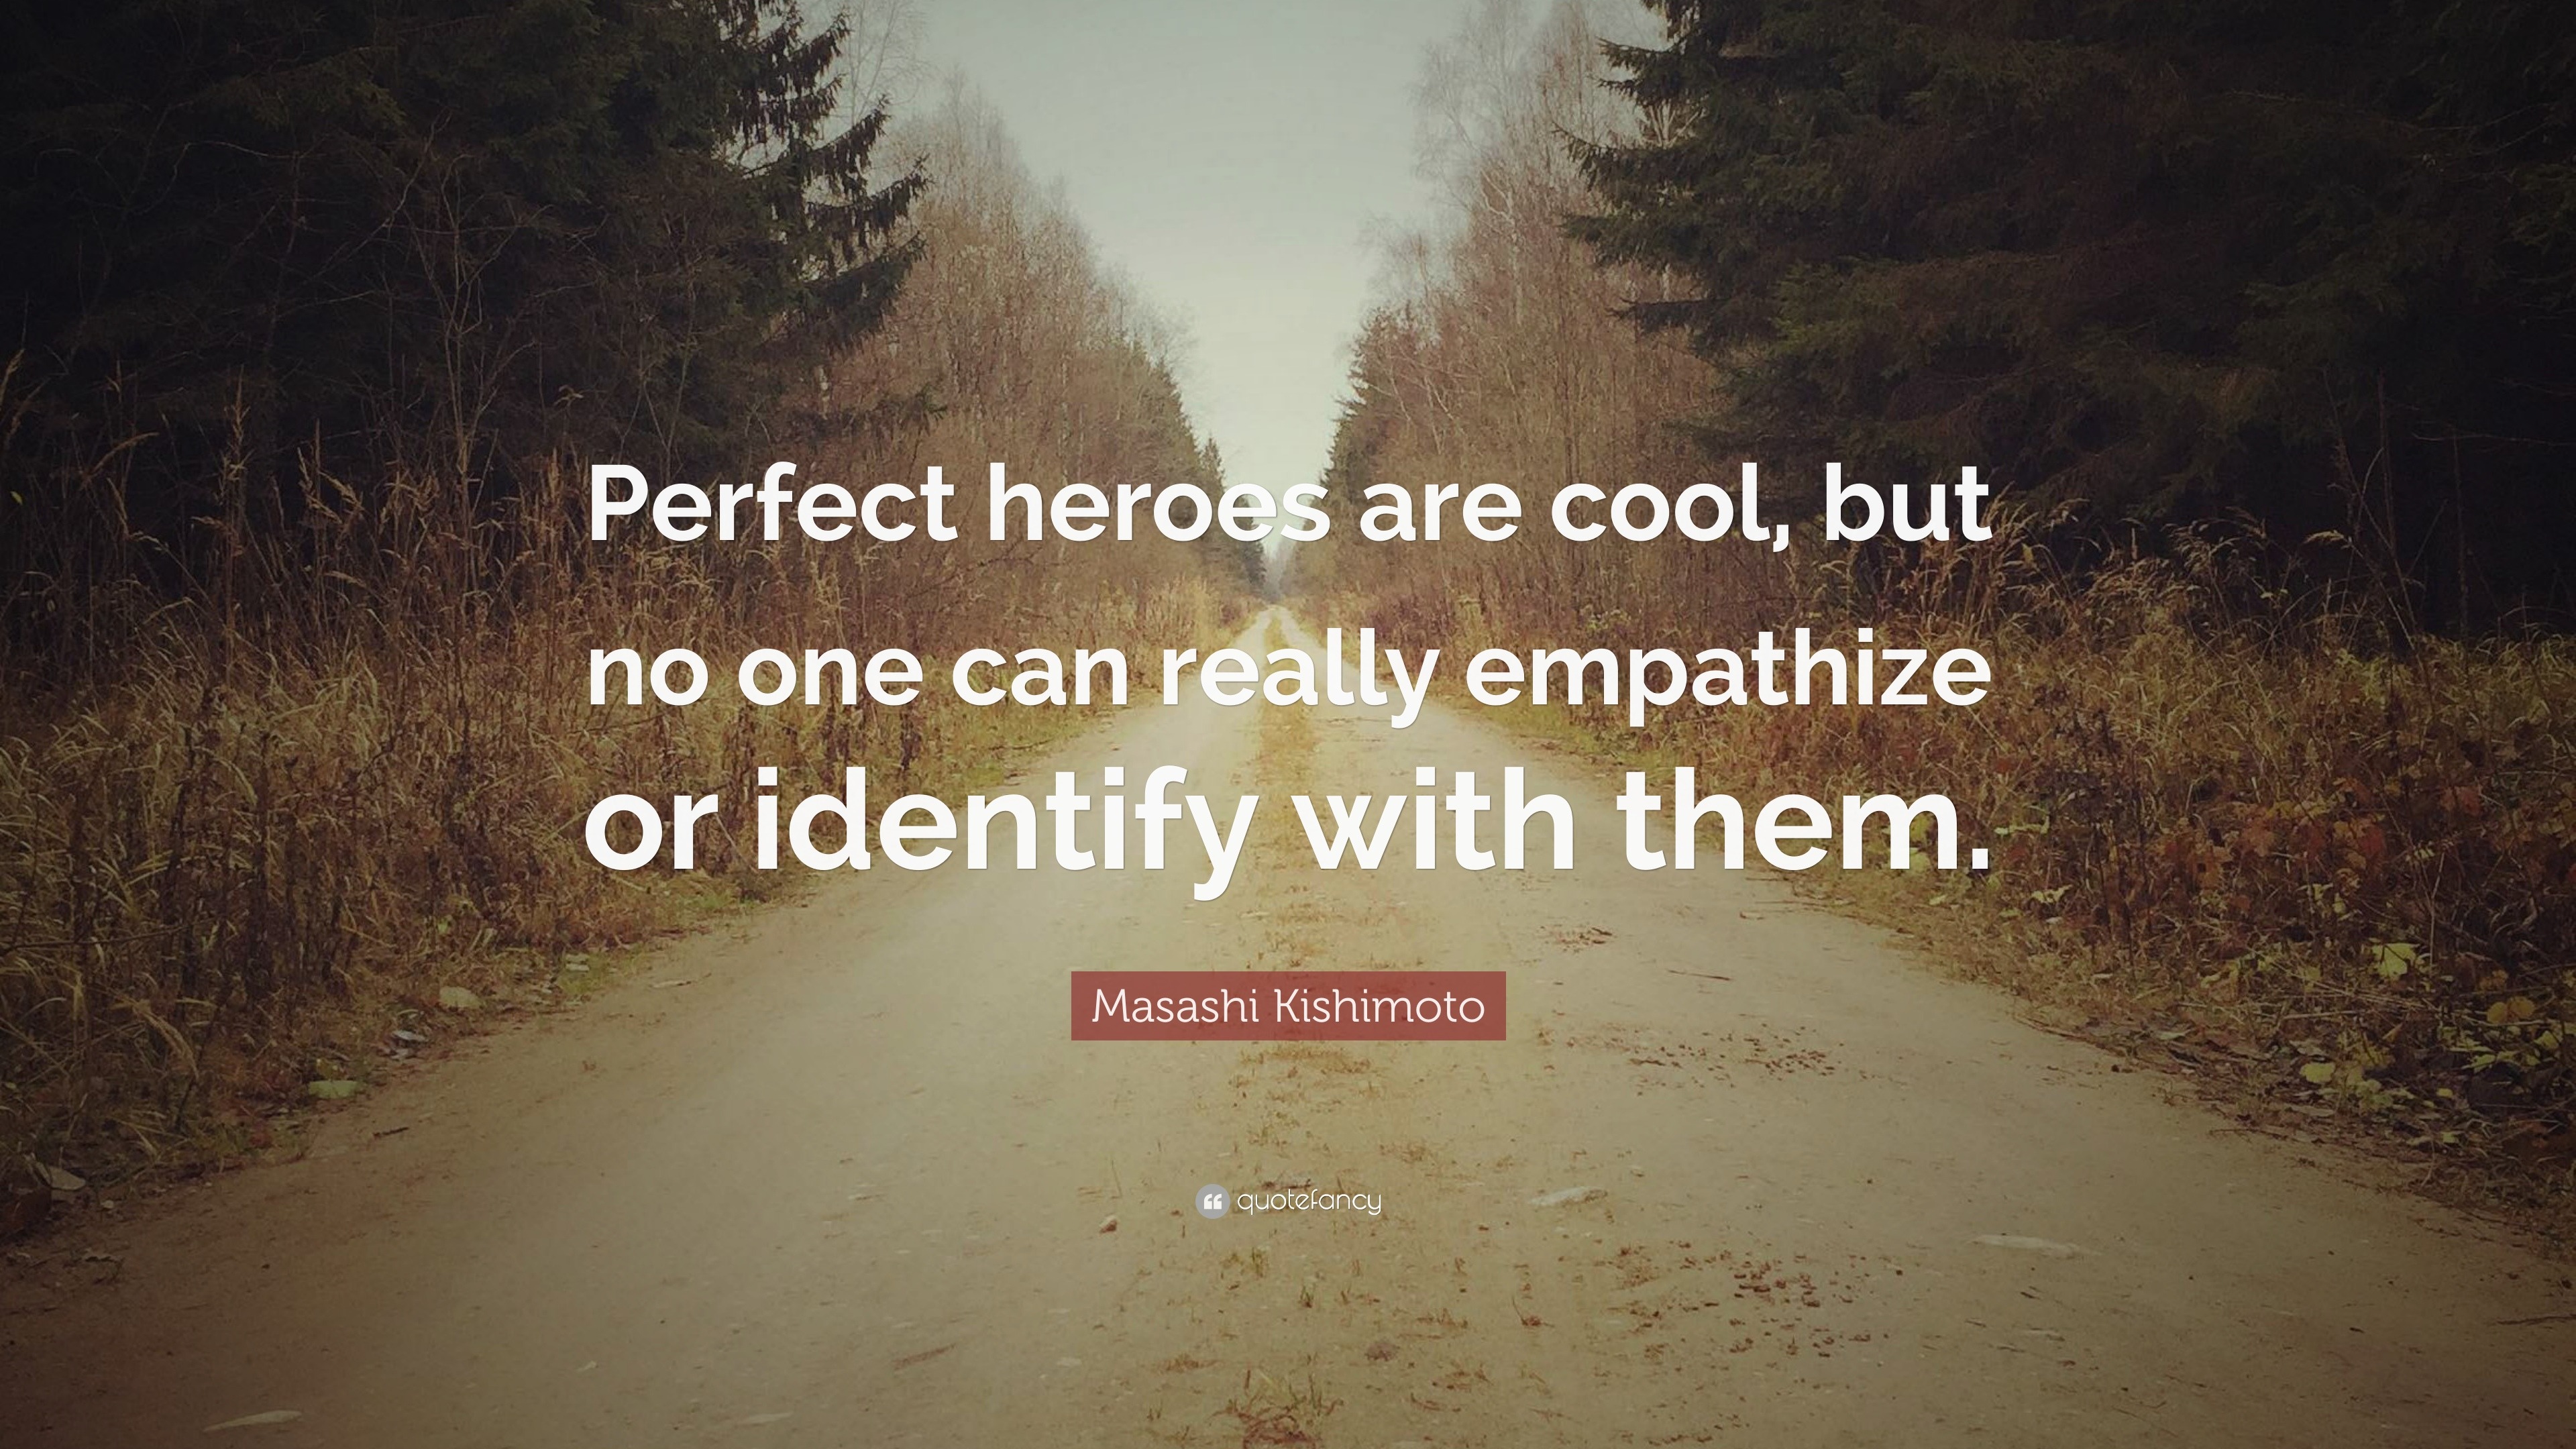 Masashi Kishimoto Quote: “Perfect heroes are cool, but no one can ...